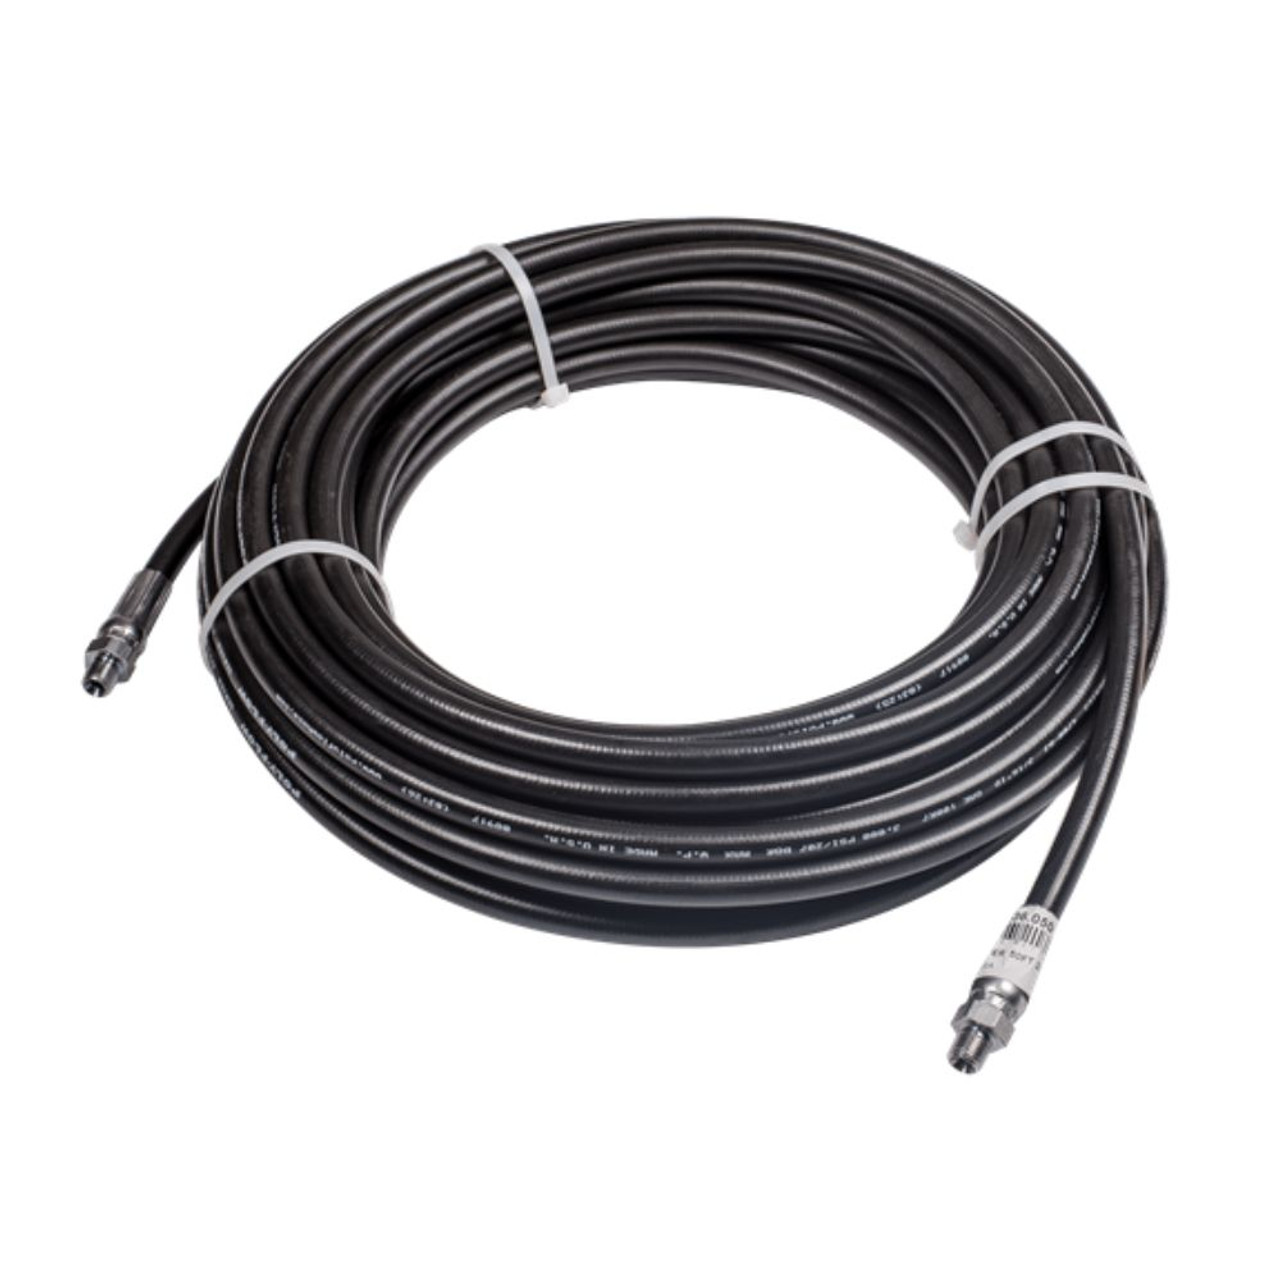 ECHO PRESSURE WASHER HOSE 25' X 1/4 PACKAGED FOR POWER WASHERS